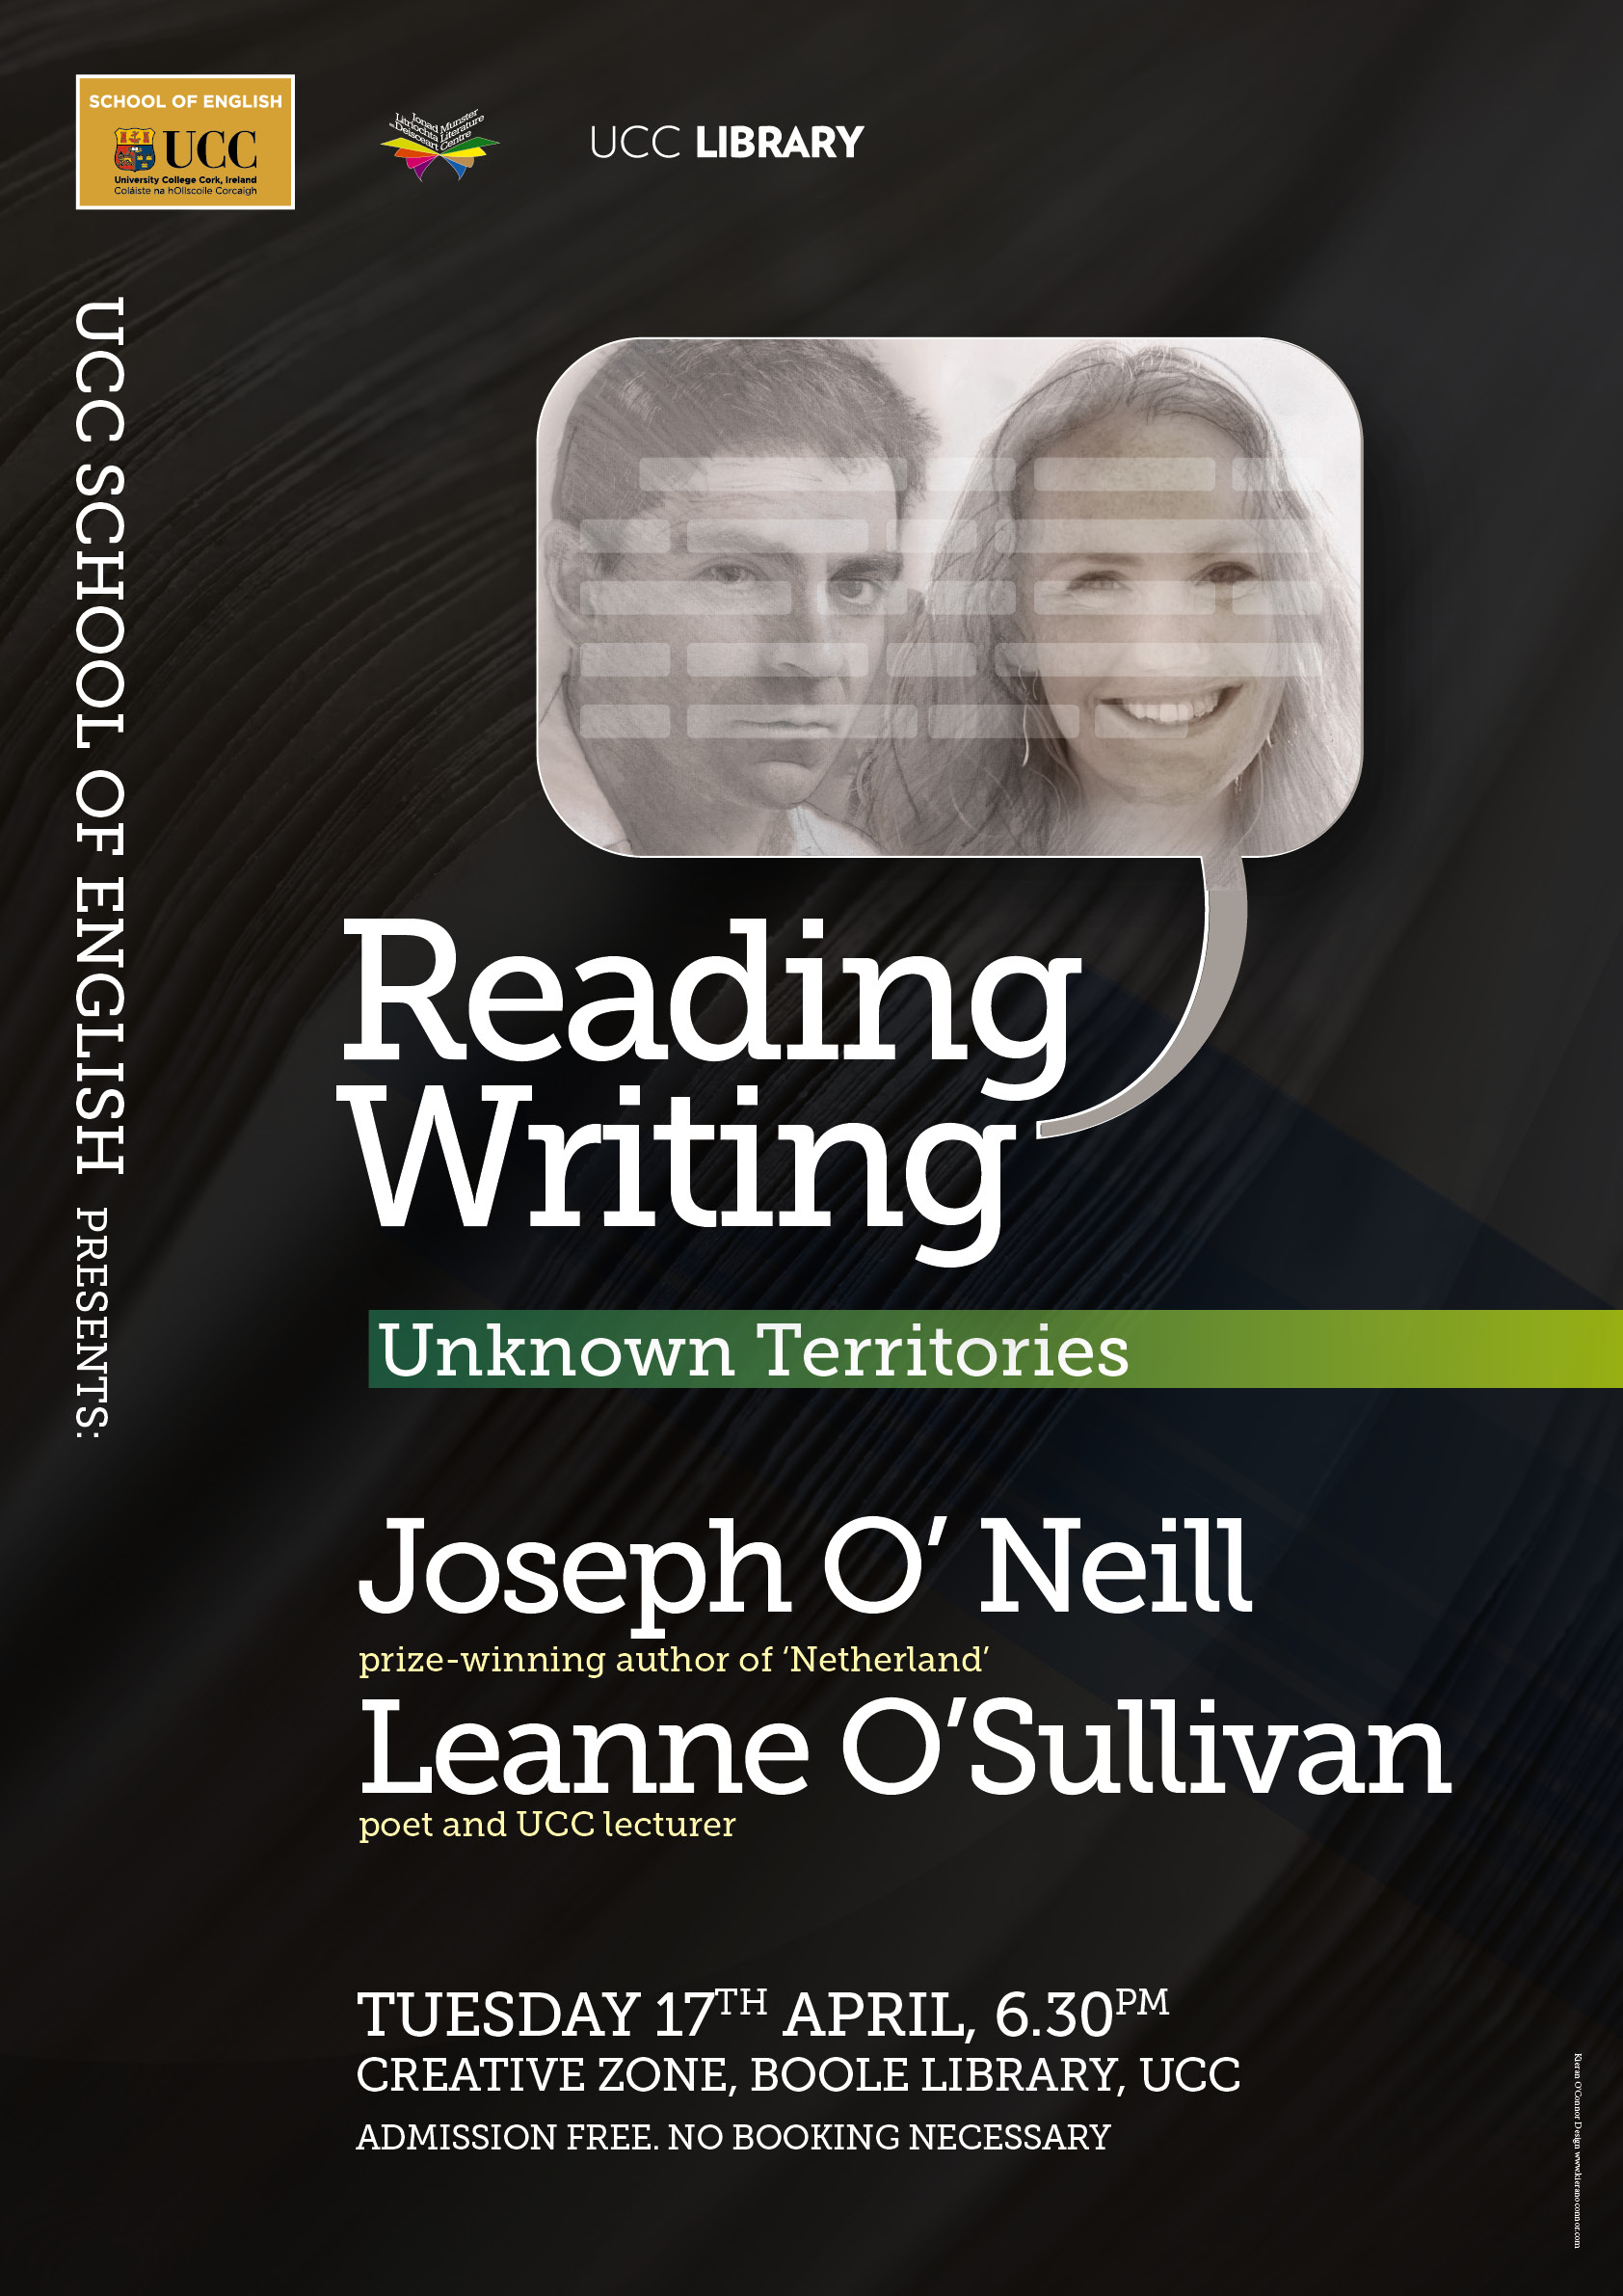 The final event in this year's School of English Reading Series takes place on Tuesday, April 17, and will feature Pen/Faulkner prize-winning author Joseph O'Neill and poet Leanne O'Sullivan, who is a valued member of  UCC's creative writing faculty.